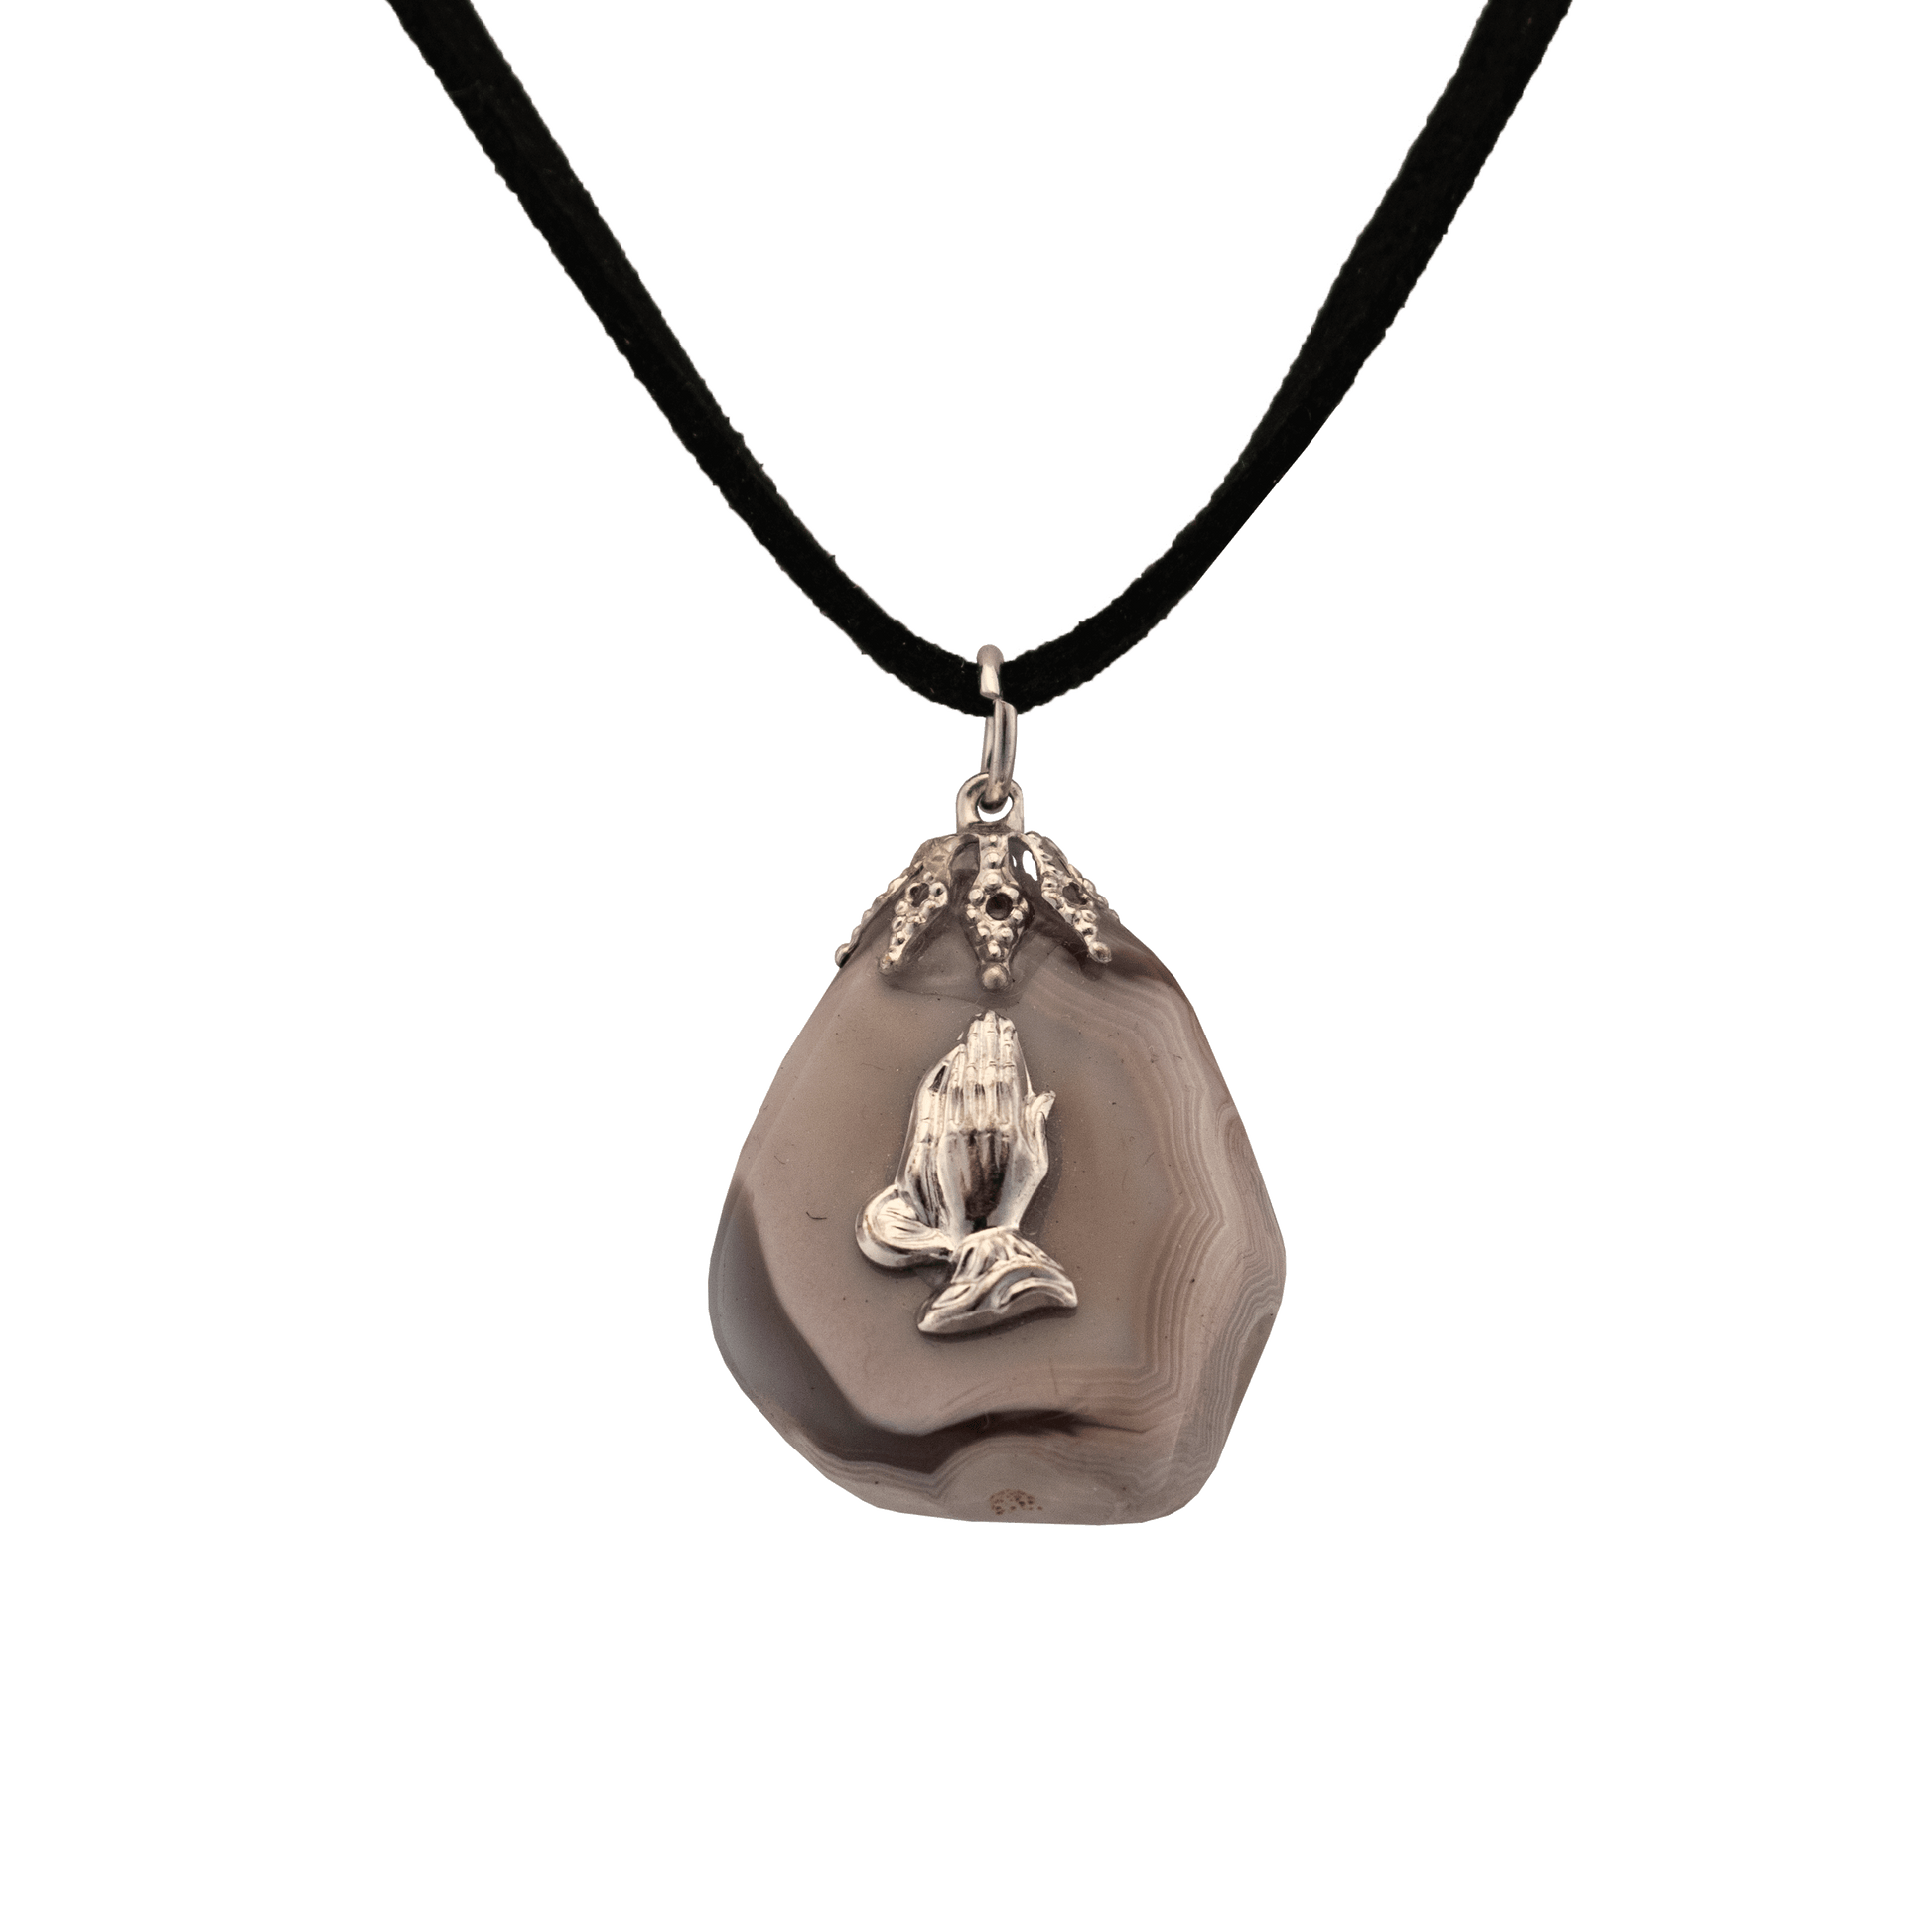 Teardrop shaped Lavender Agate Stone pendant with praying hands in the center on a black cord